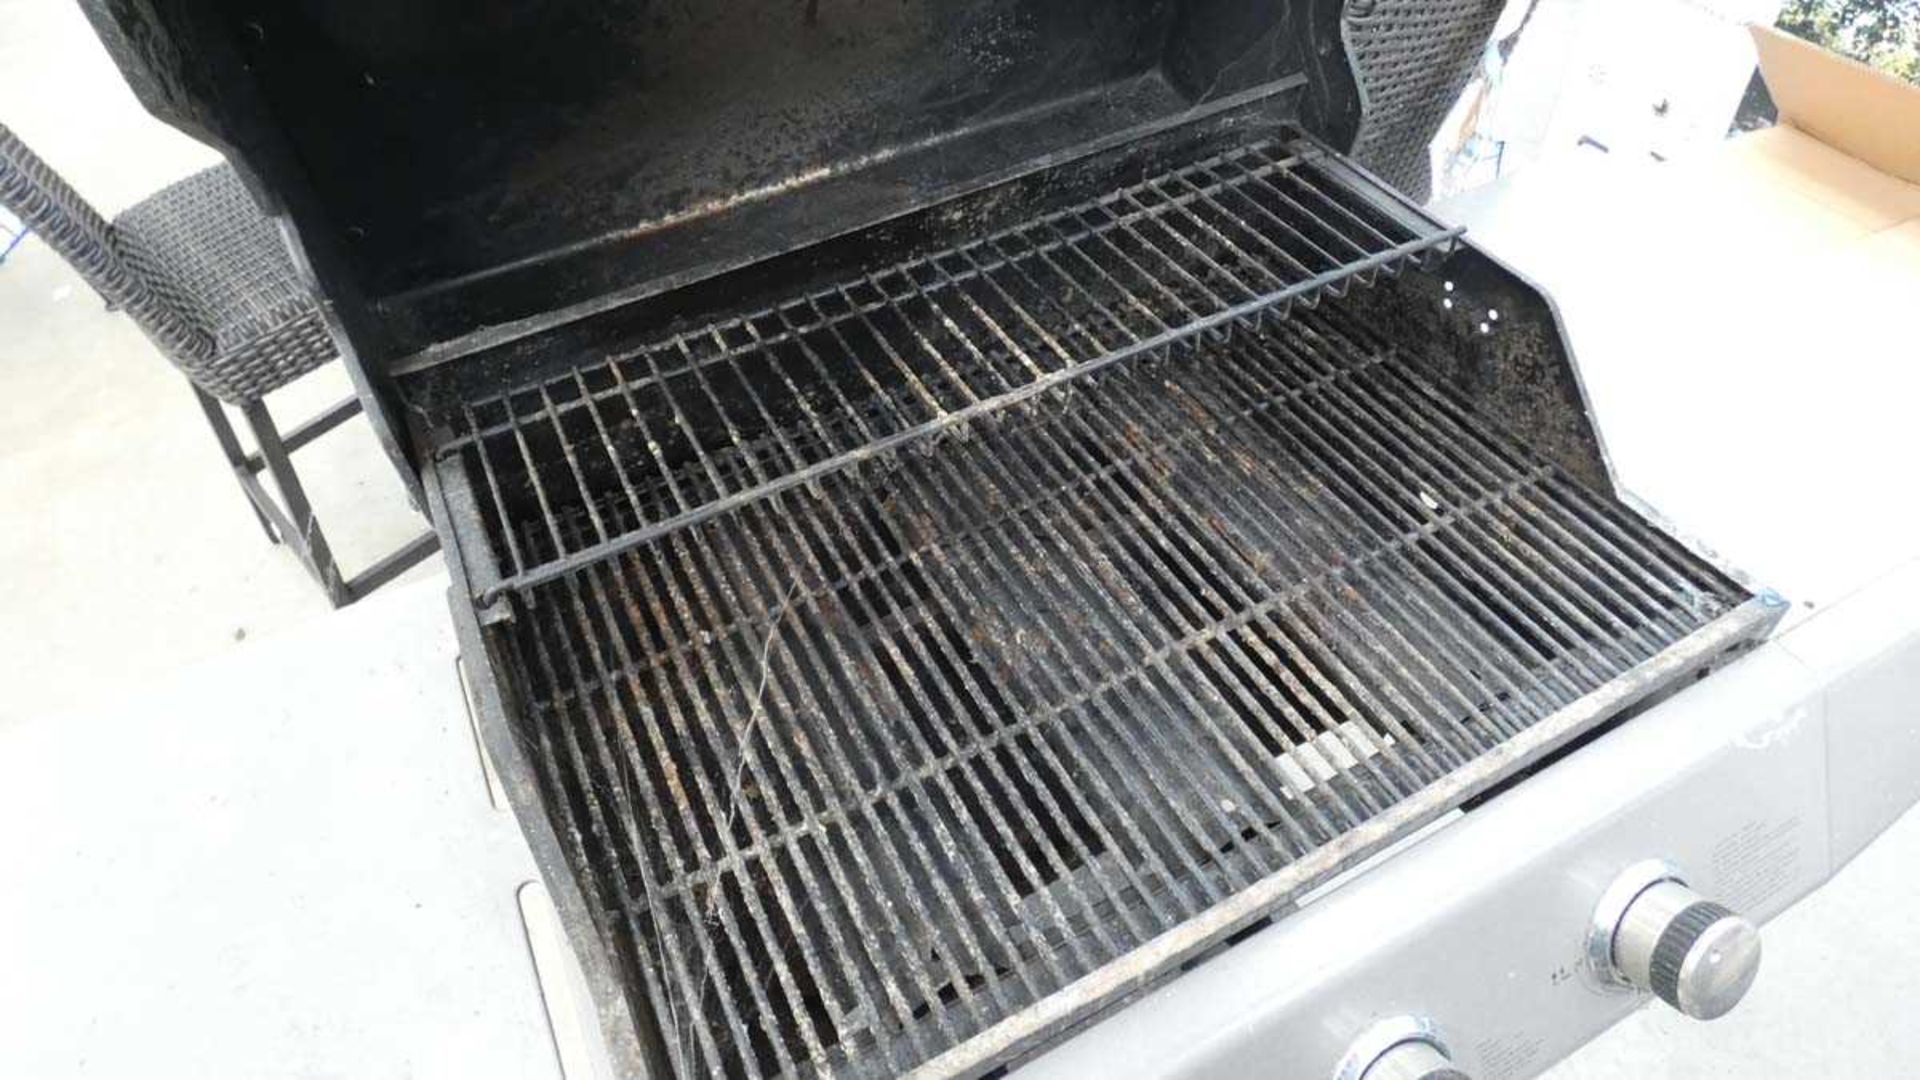 Stainless steel gas BBQ - Image 2 of 2